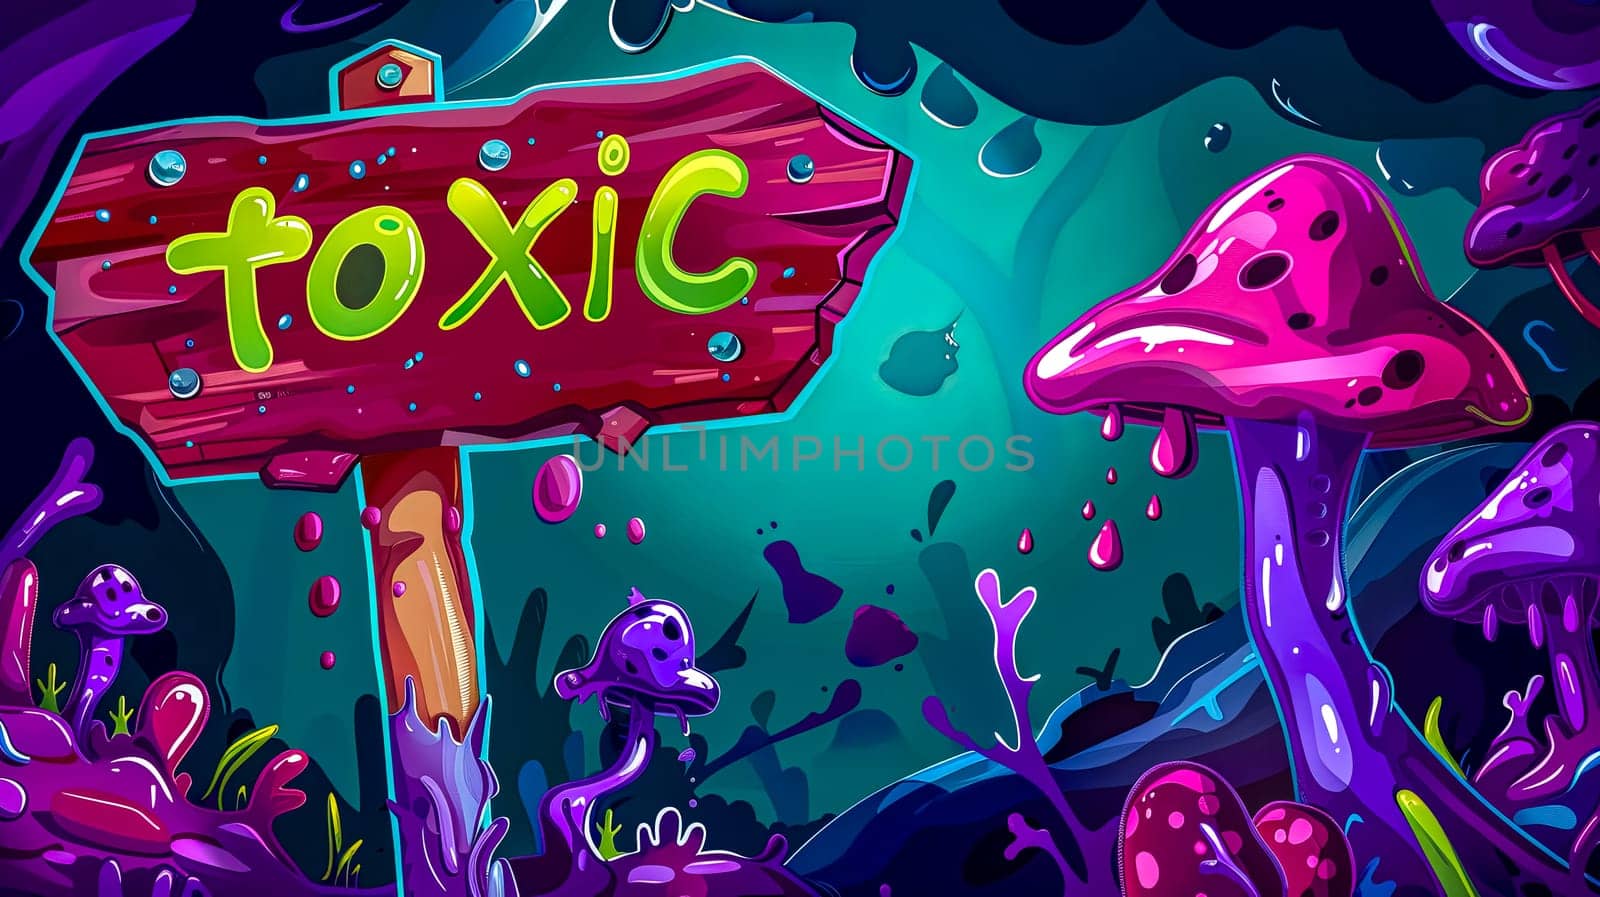 Cartoon toxic swamp scene with mushrooms and slime by Edophoto